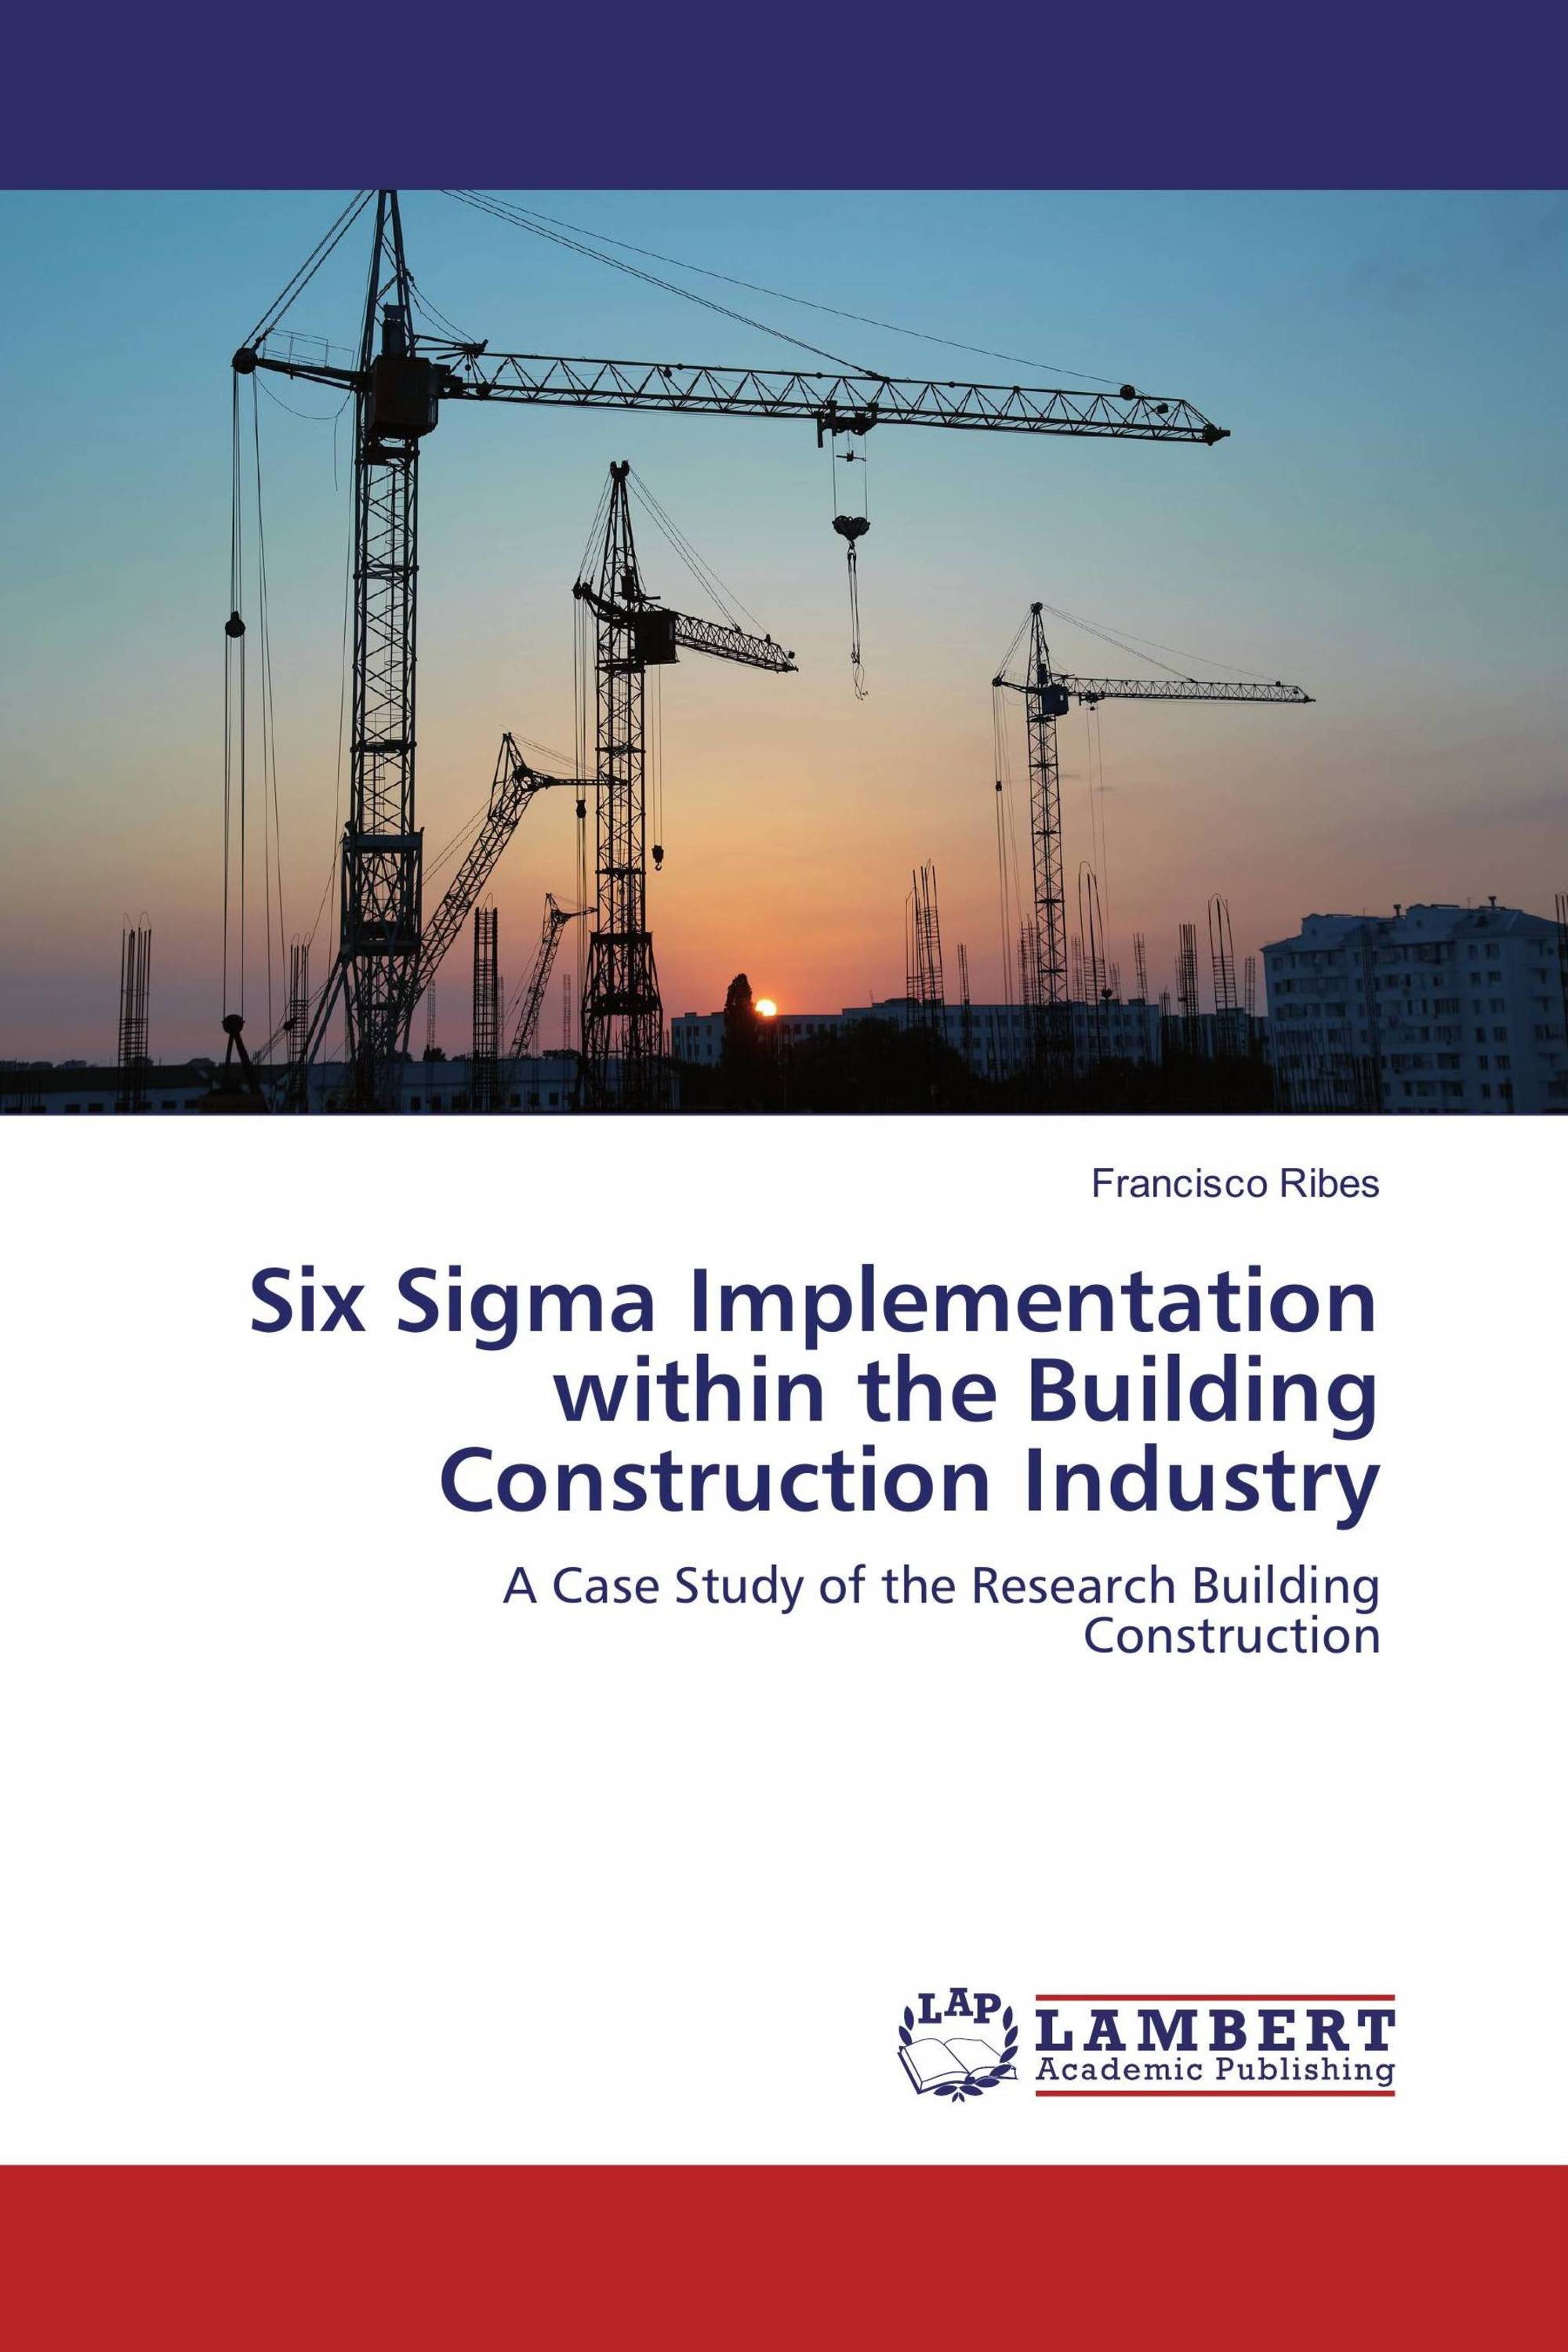 six sigma case studies in construction